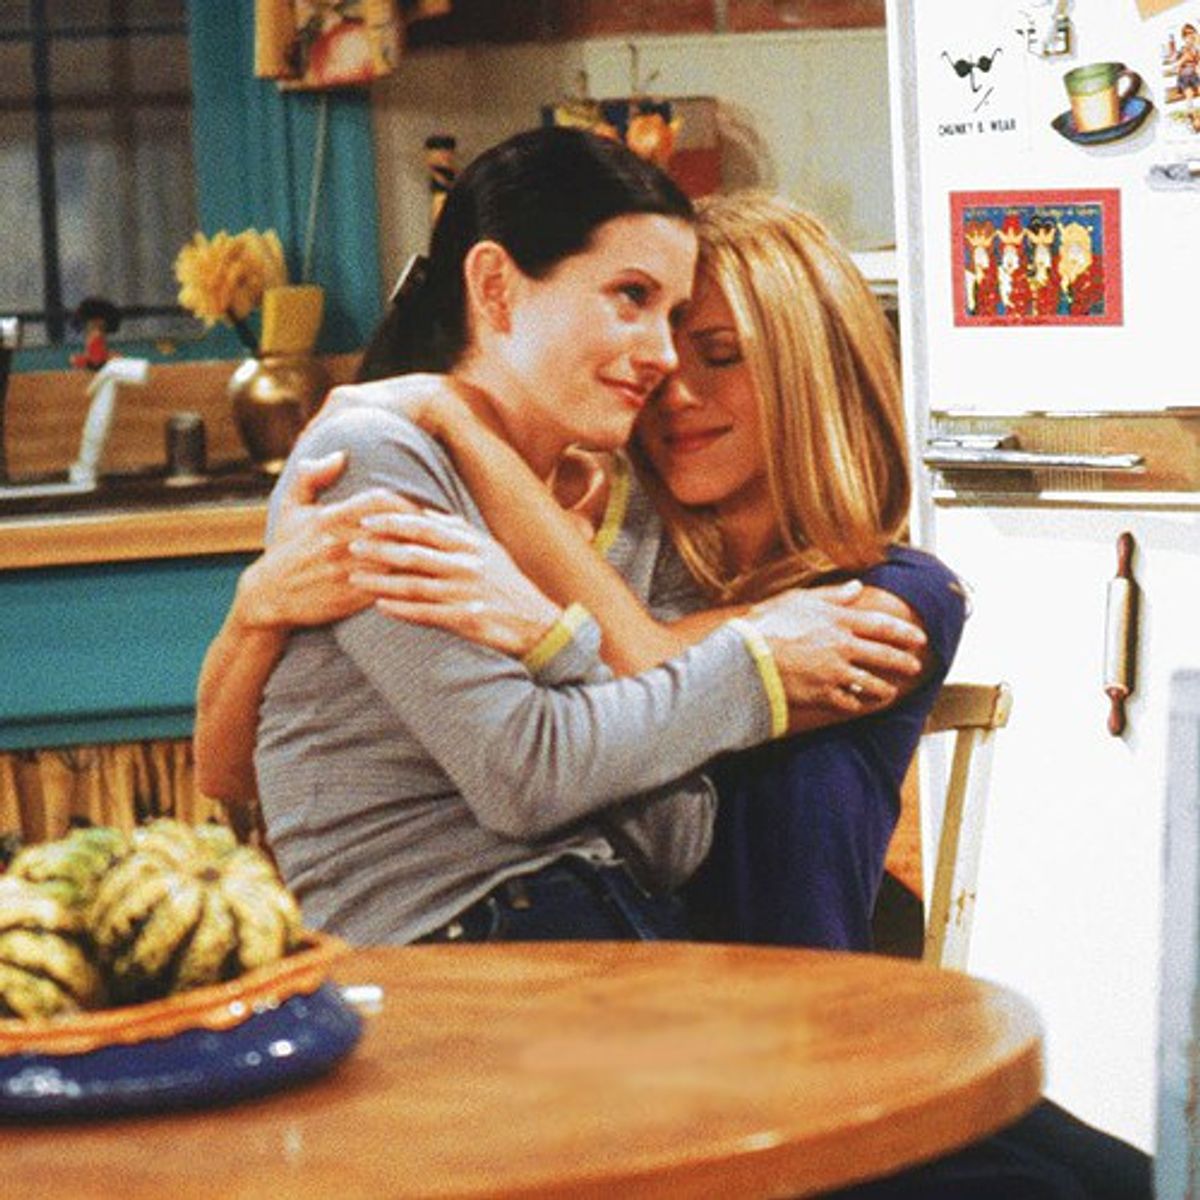 10 Times You And Your Roommate Were Monica And Rachel From "Friends"